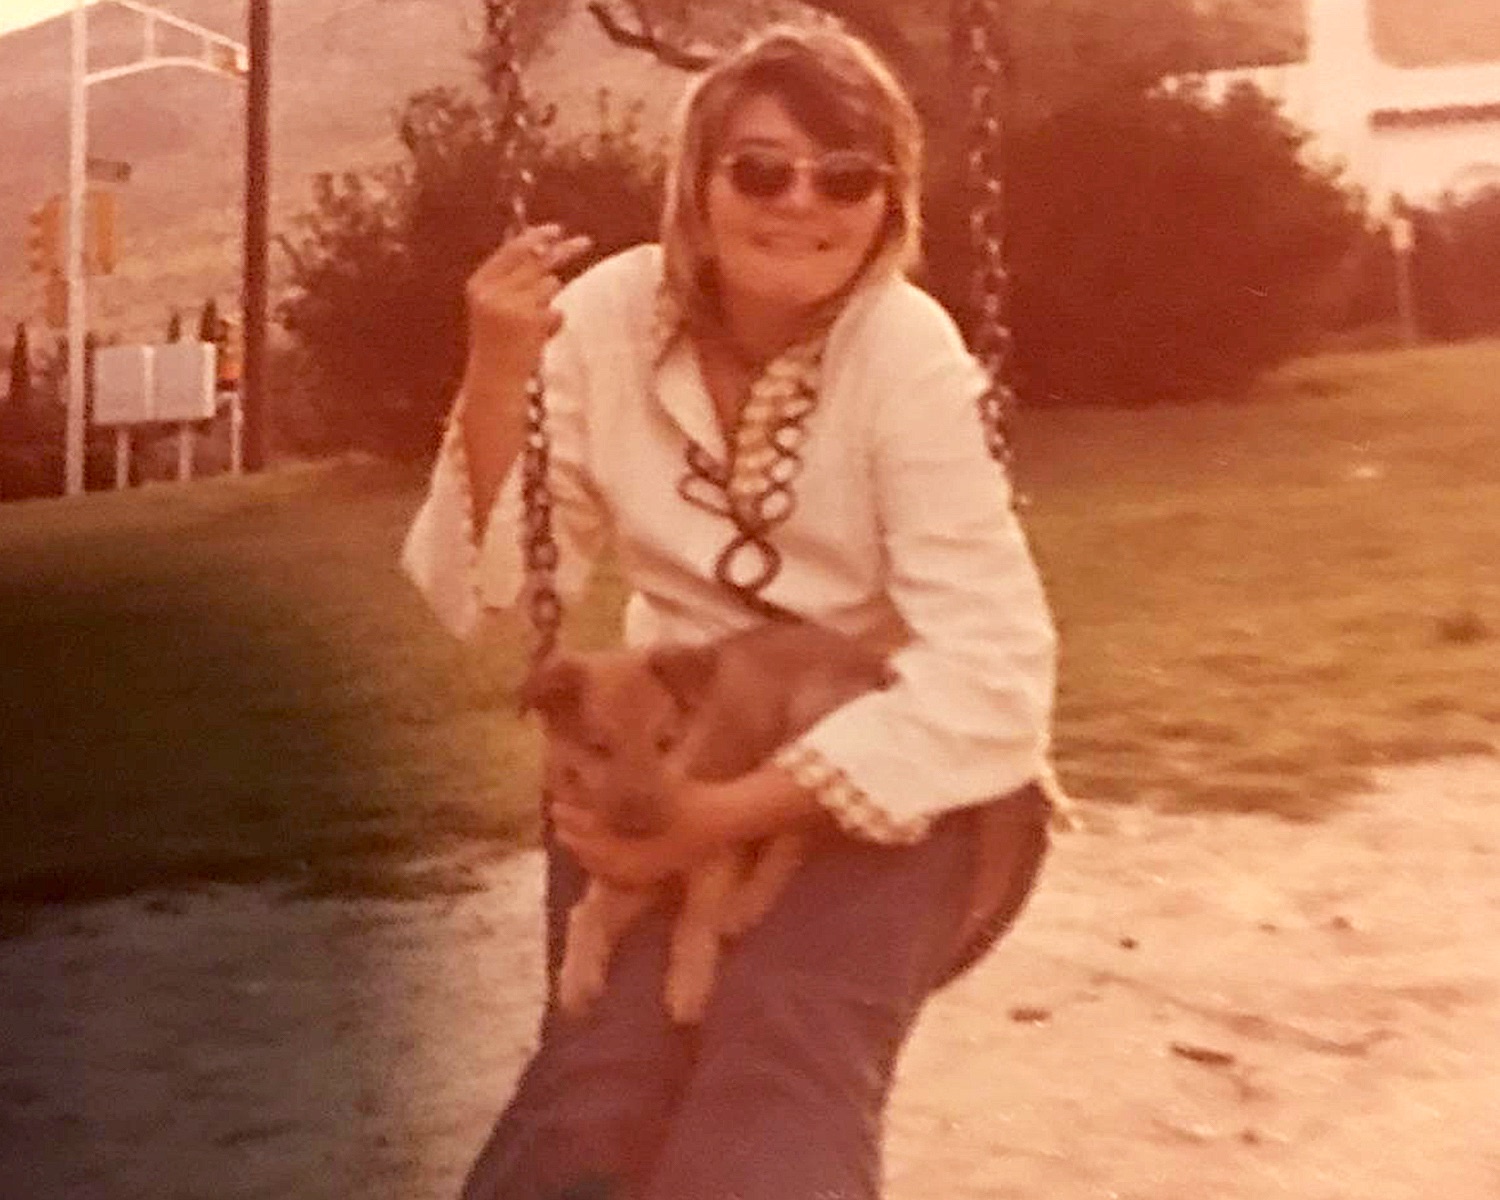 Charlotte visiting her mother after returning from Germany, Oklahoma, 1974.